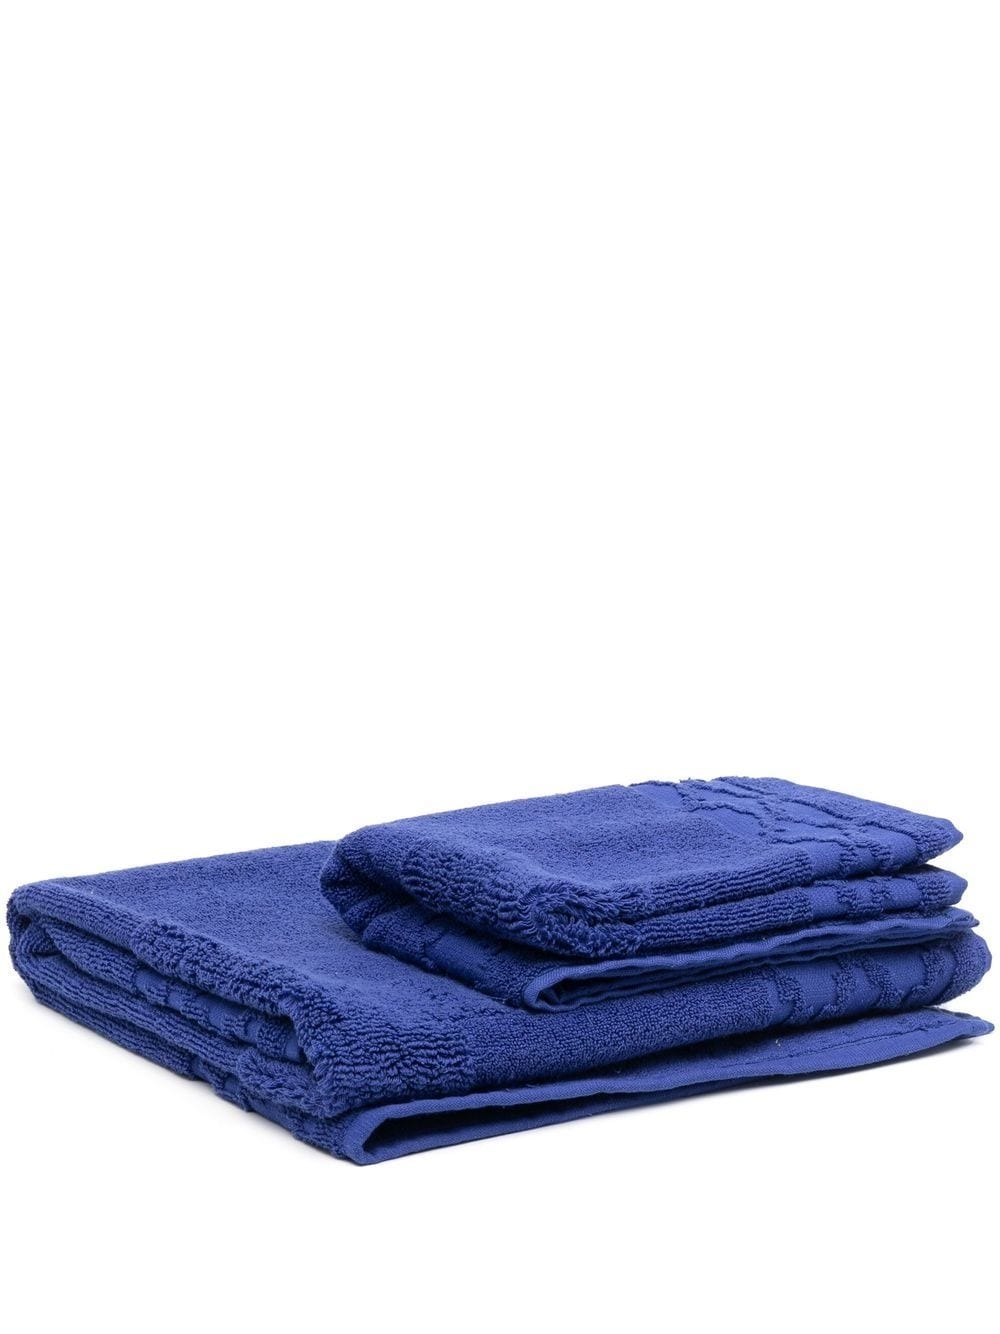 abstract-pattern towel set - 1